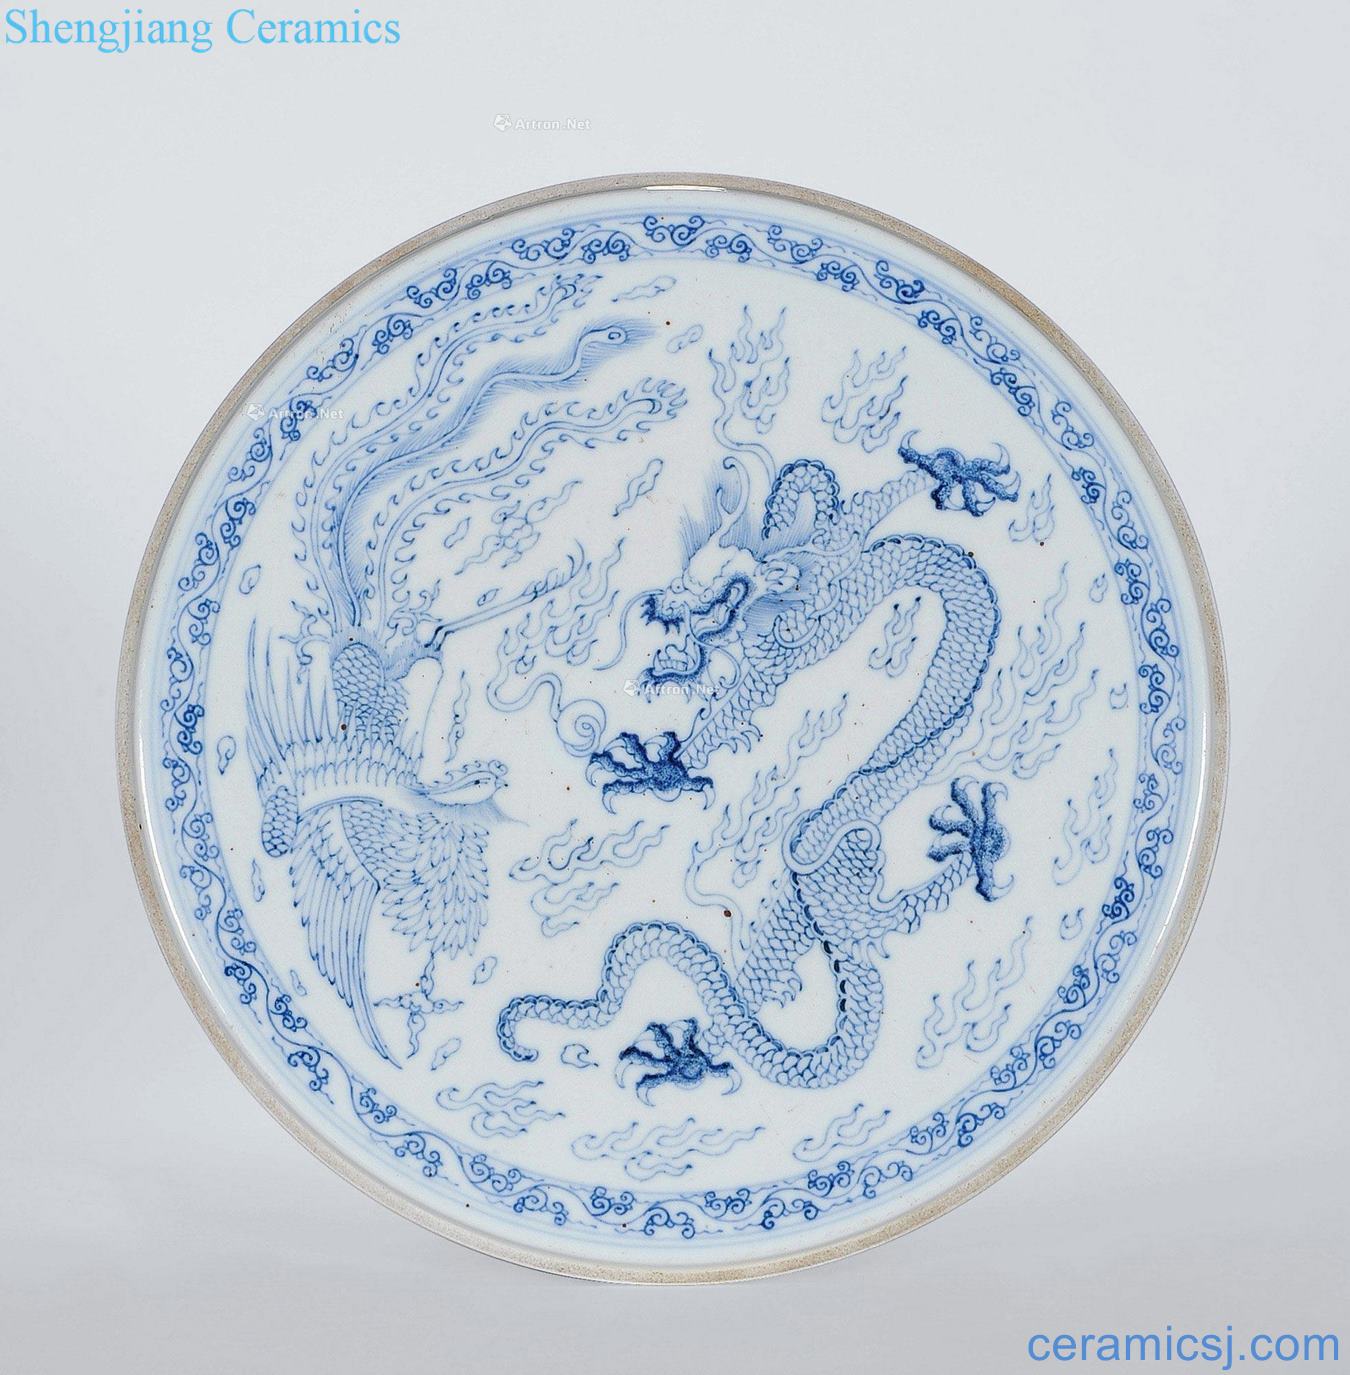 The qing emperor kangxi Blue and white figure round porcelain plate in extremely good fortune